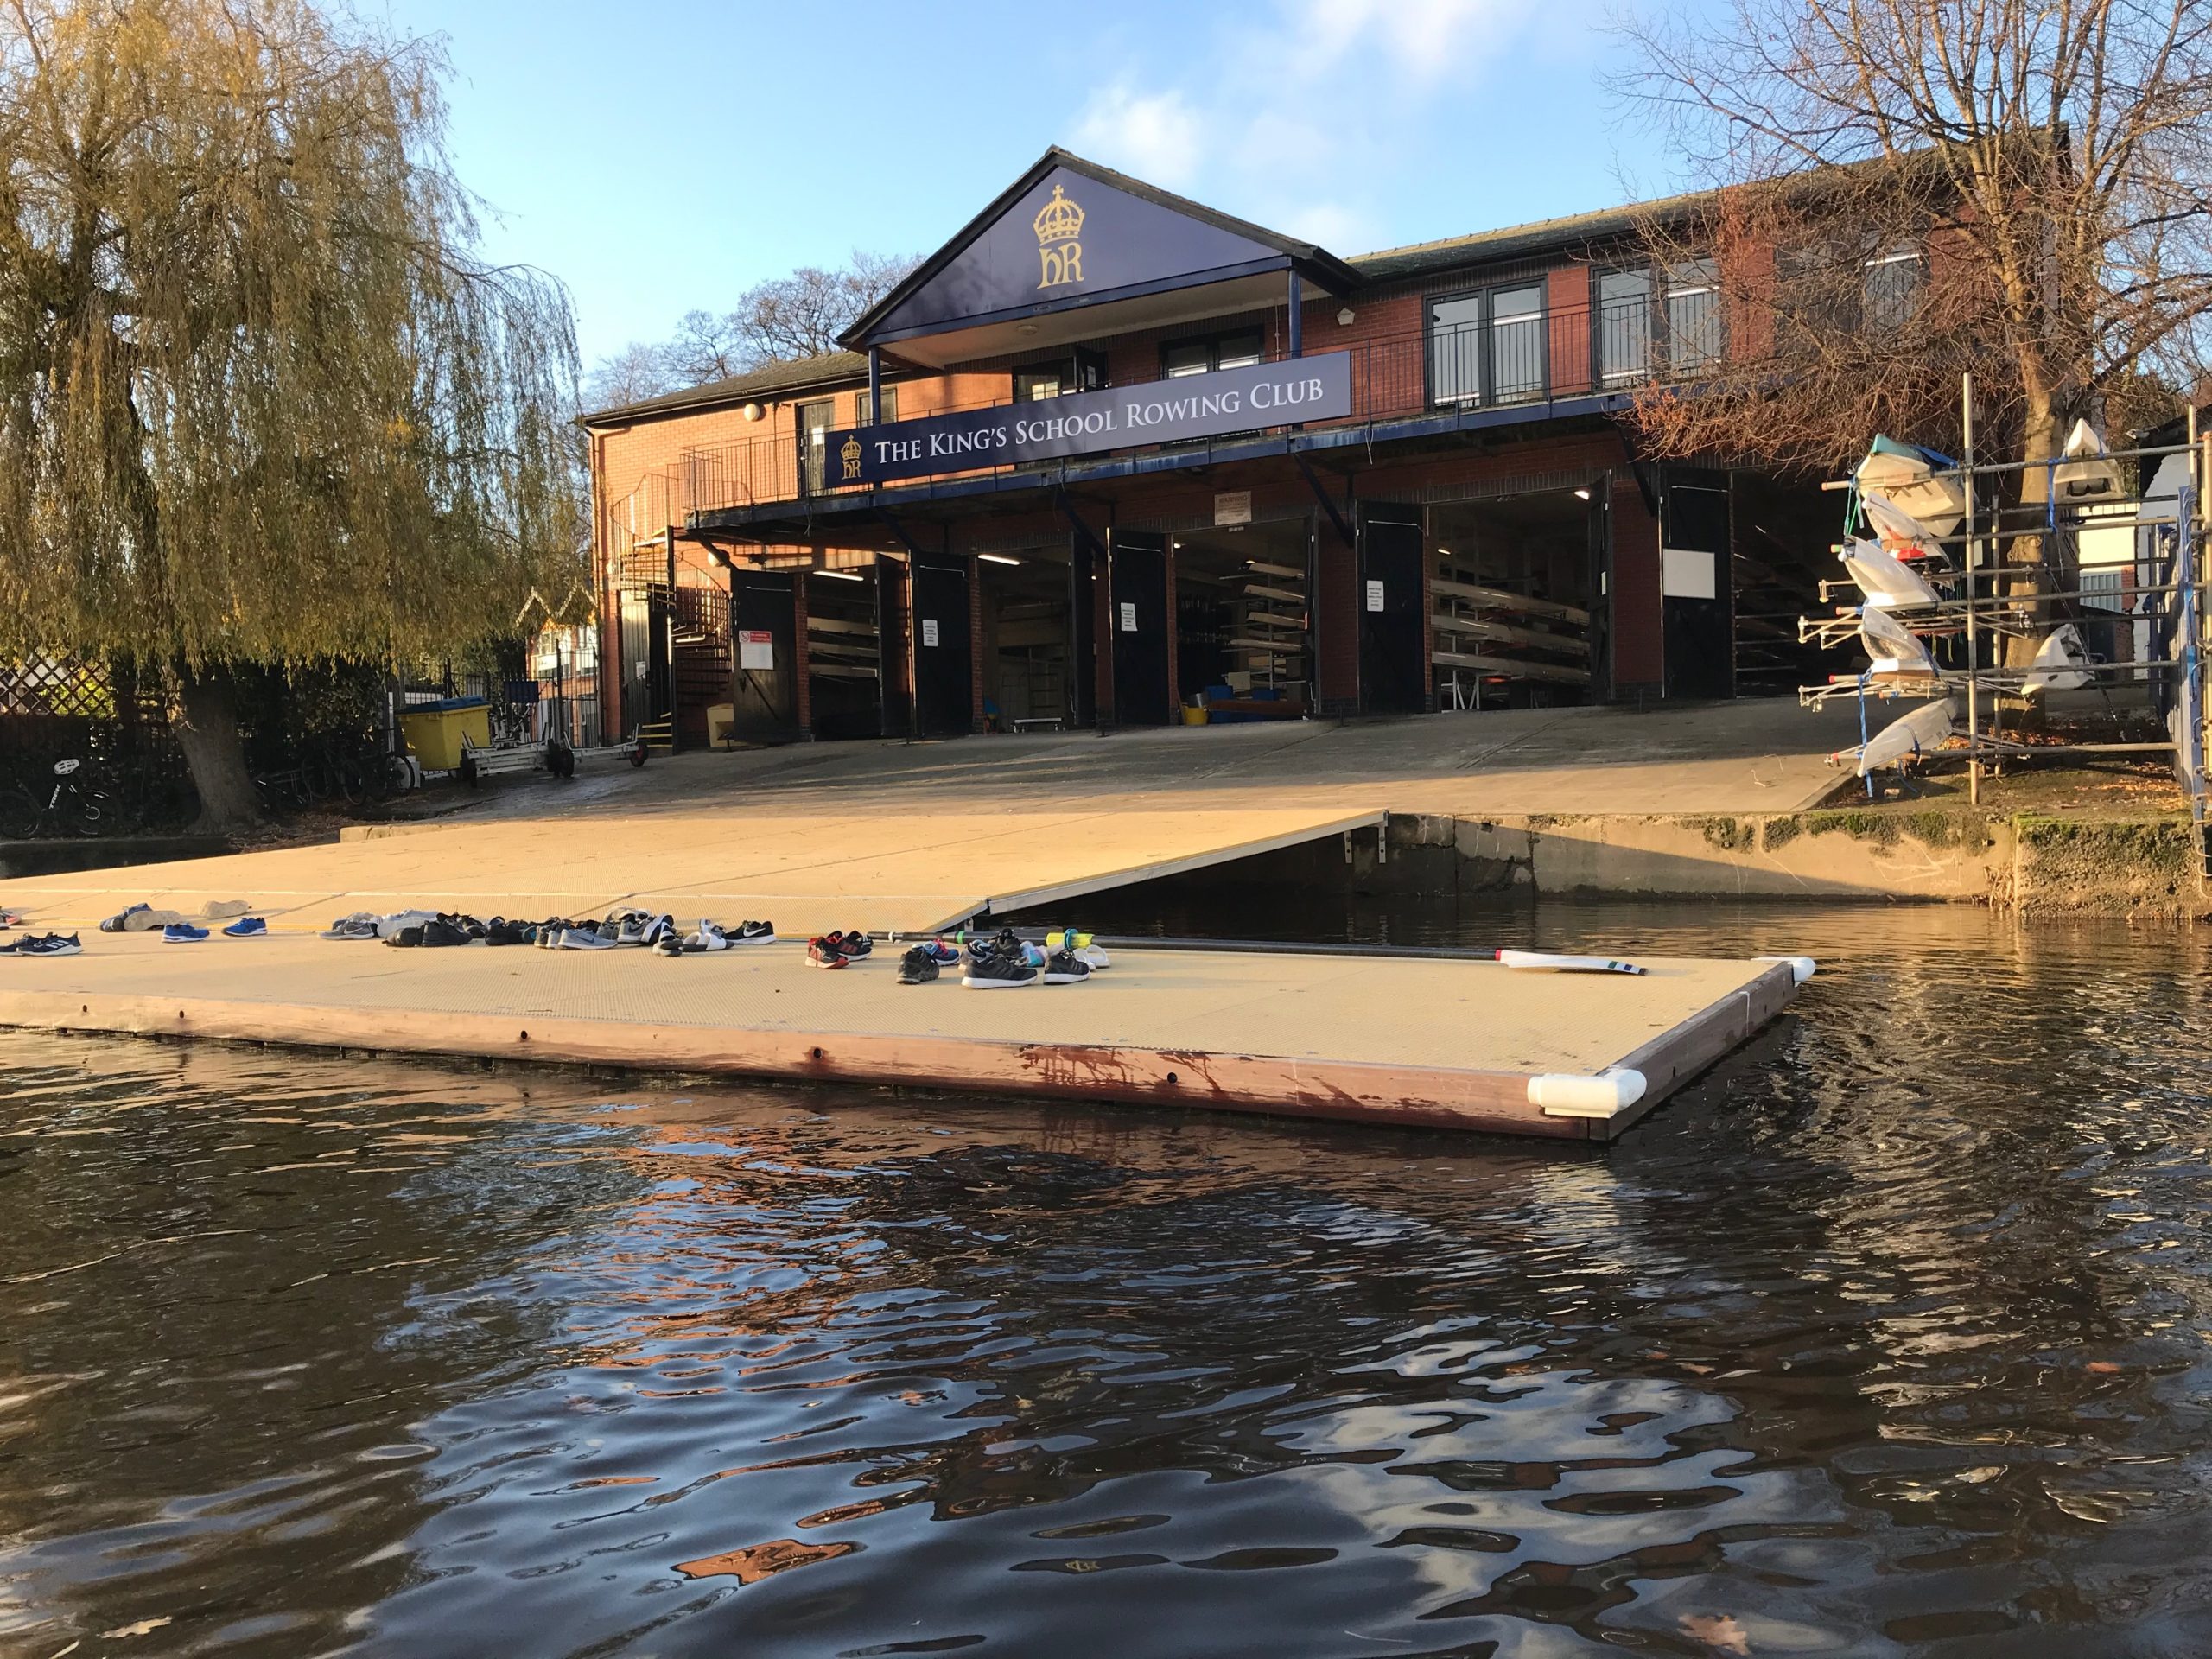 Exterior of Kings School Rowing club with a view into the boat house